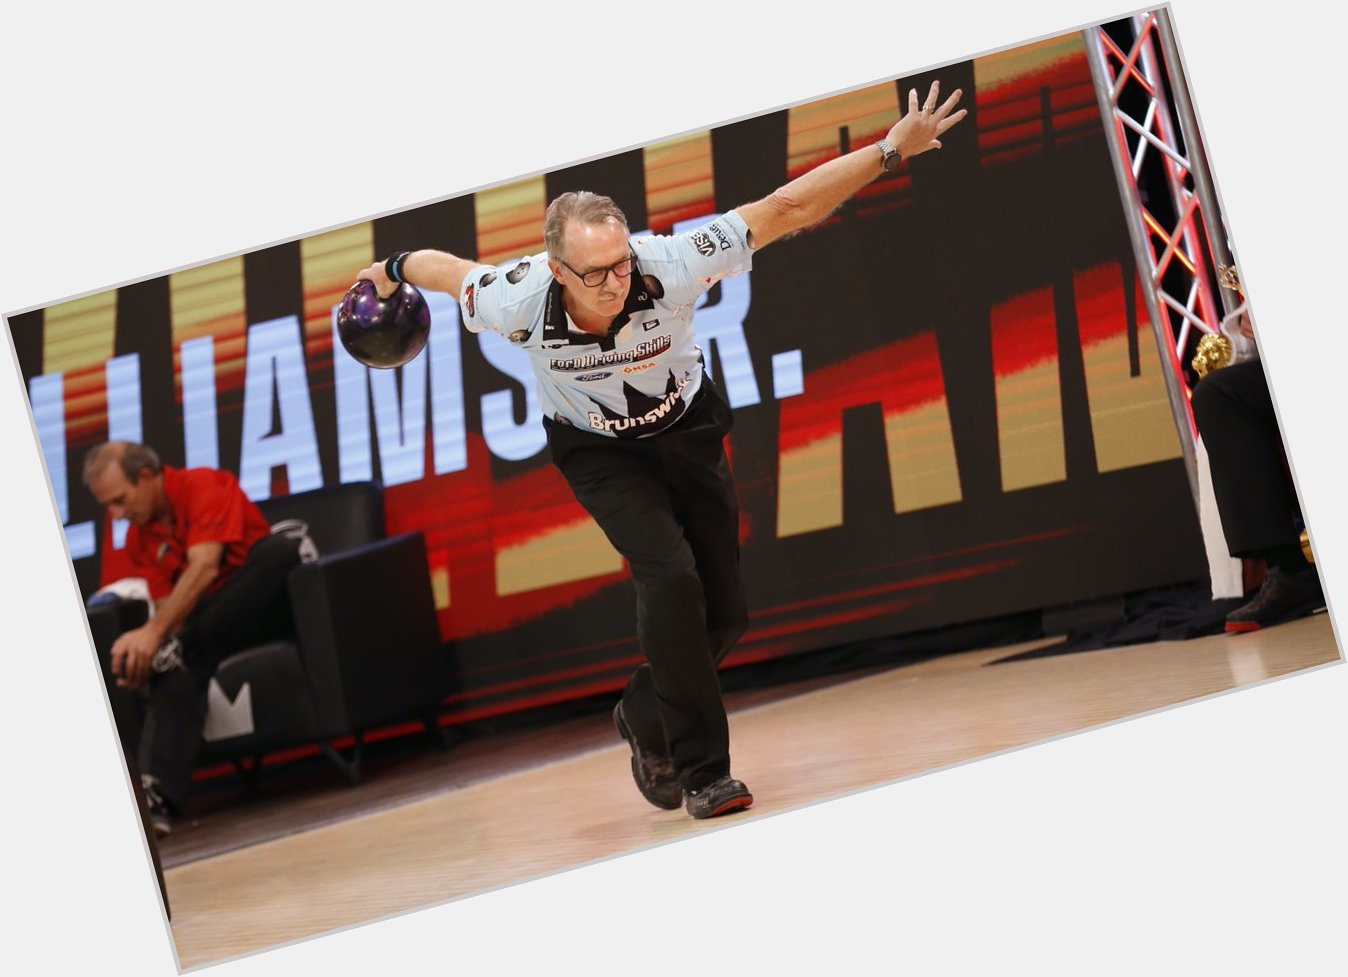 Join us in wishing 47-time PBA Tour titlist Walter Ray Williams Jr. a happy 62nd birthday! 